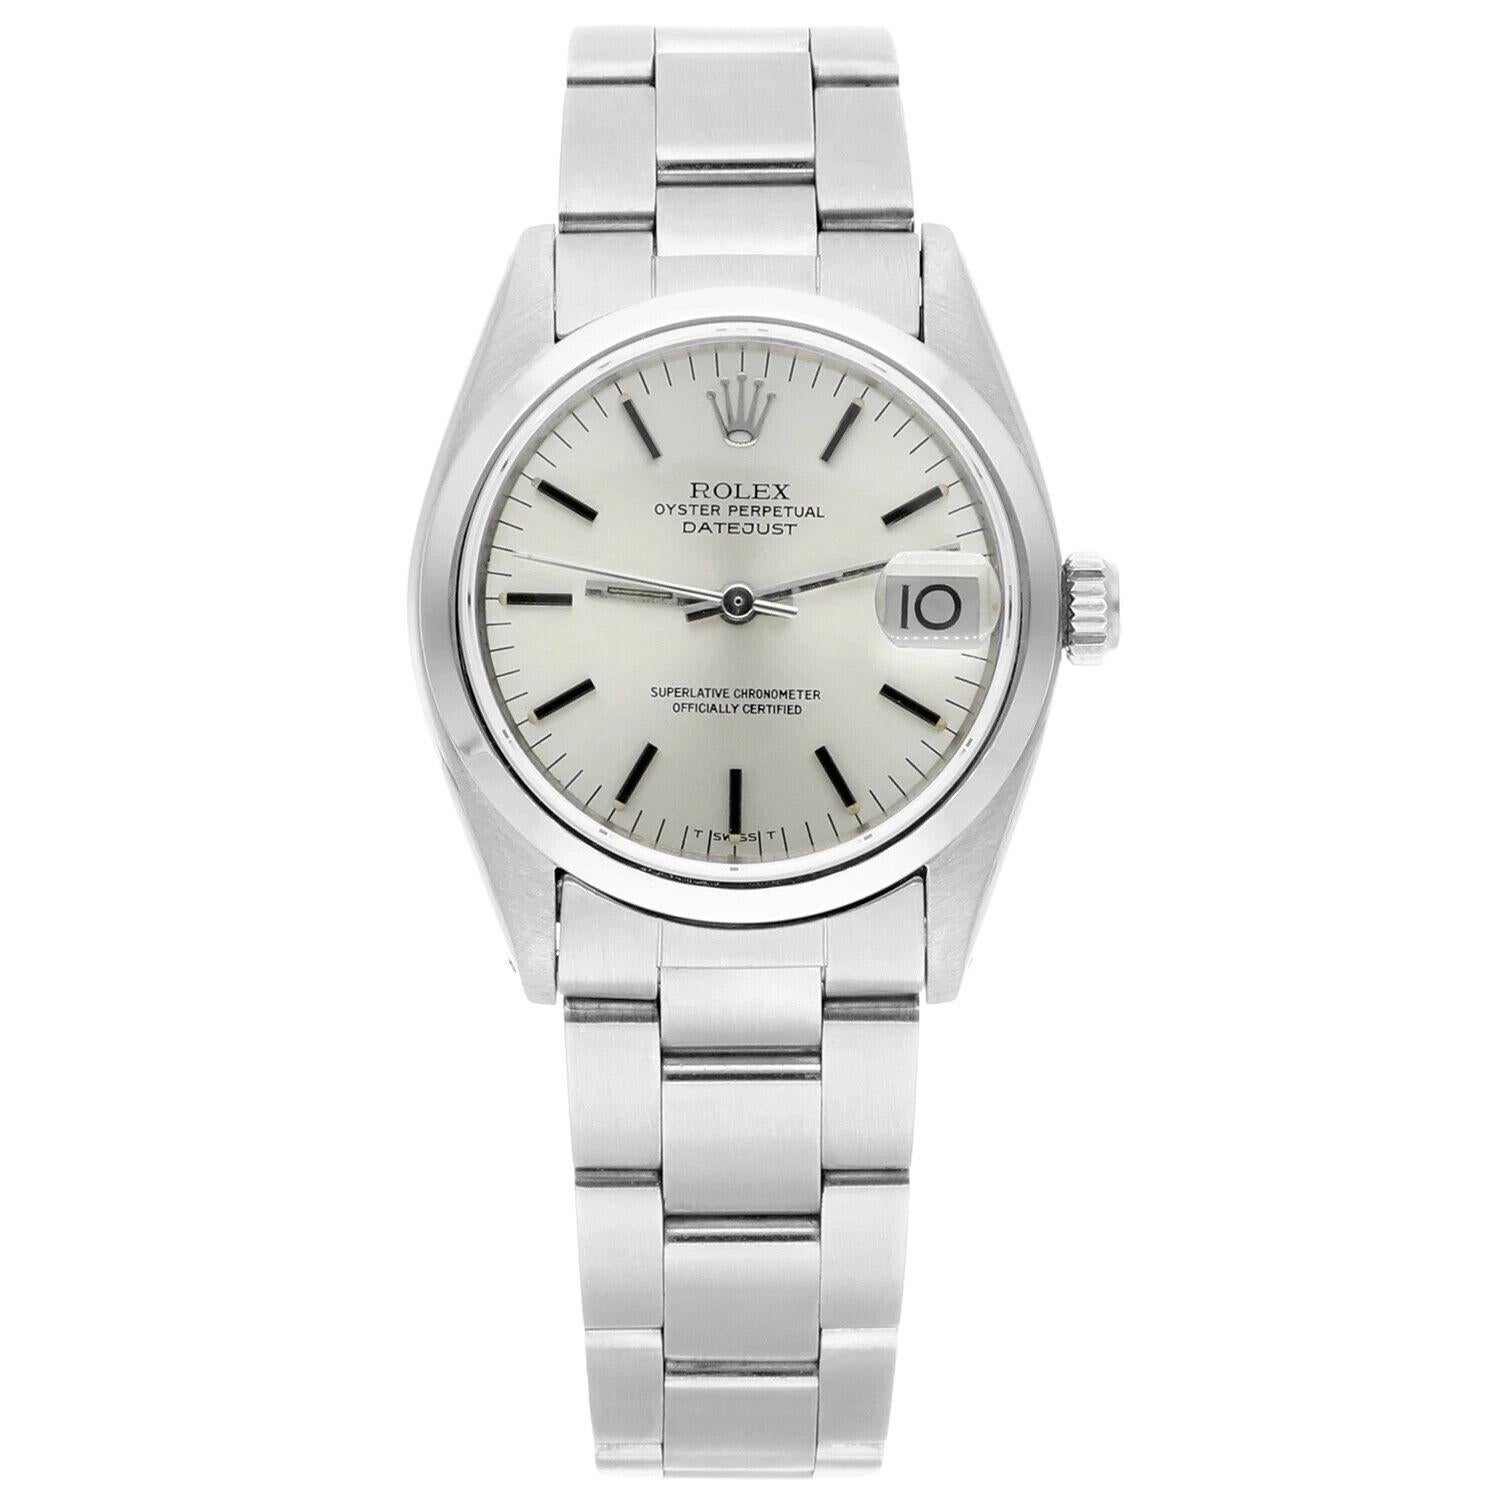 Rolex Datejust Midsize 31mm Silver Dial Steel Ladies Watch 6824, Circa 1979.
This watch has been professionally polished, serviced and is in excellent overall condition. There are absolutely no visible scratches or blemishes. Authenticity of the